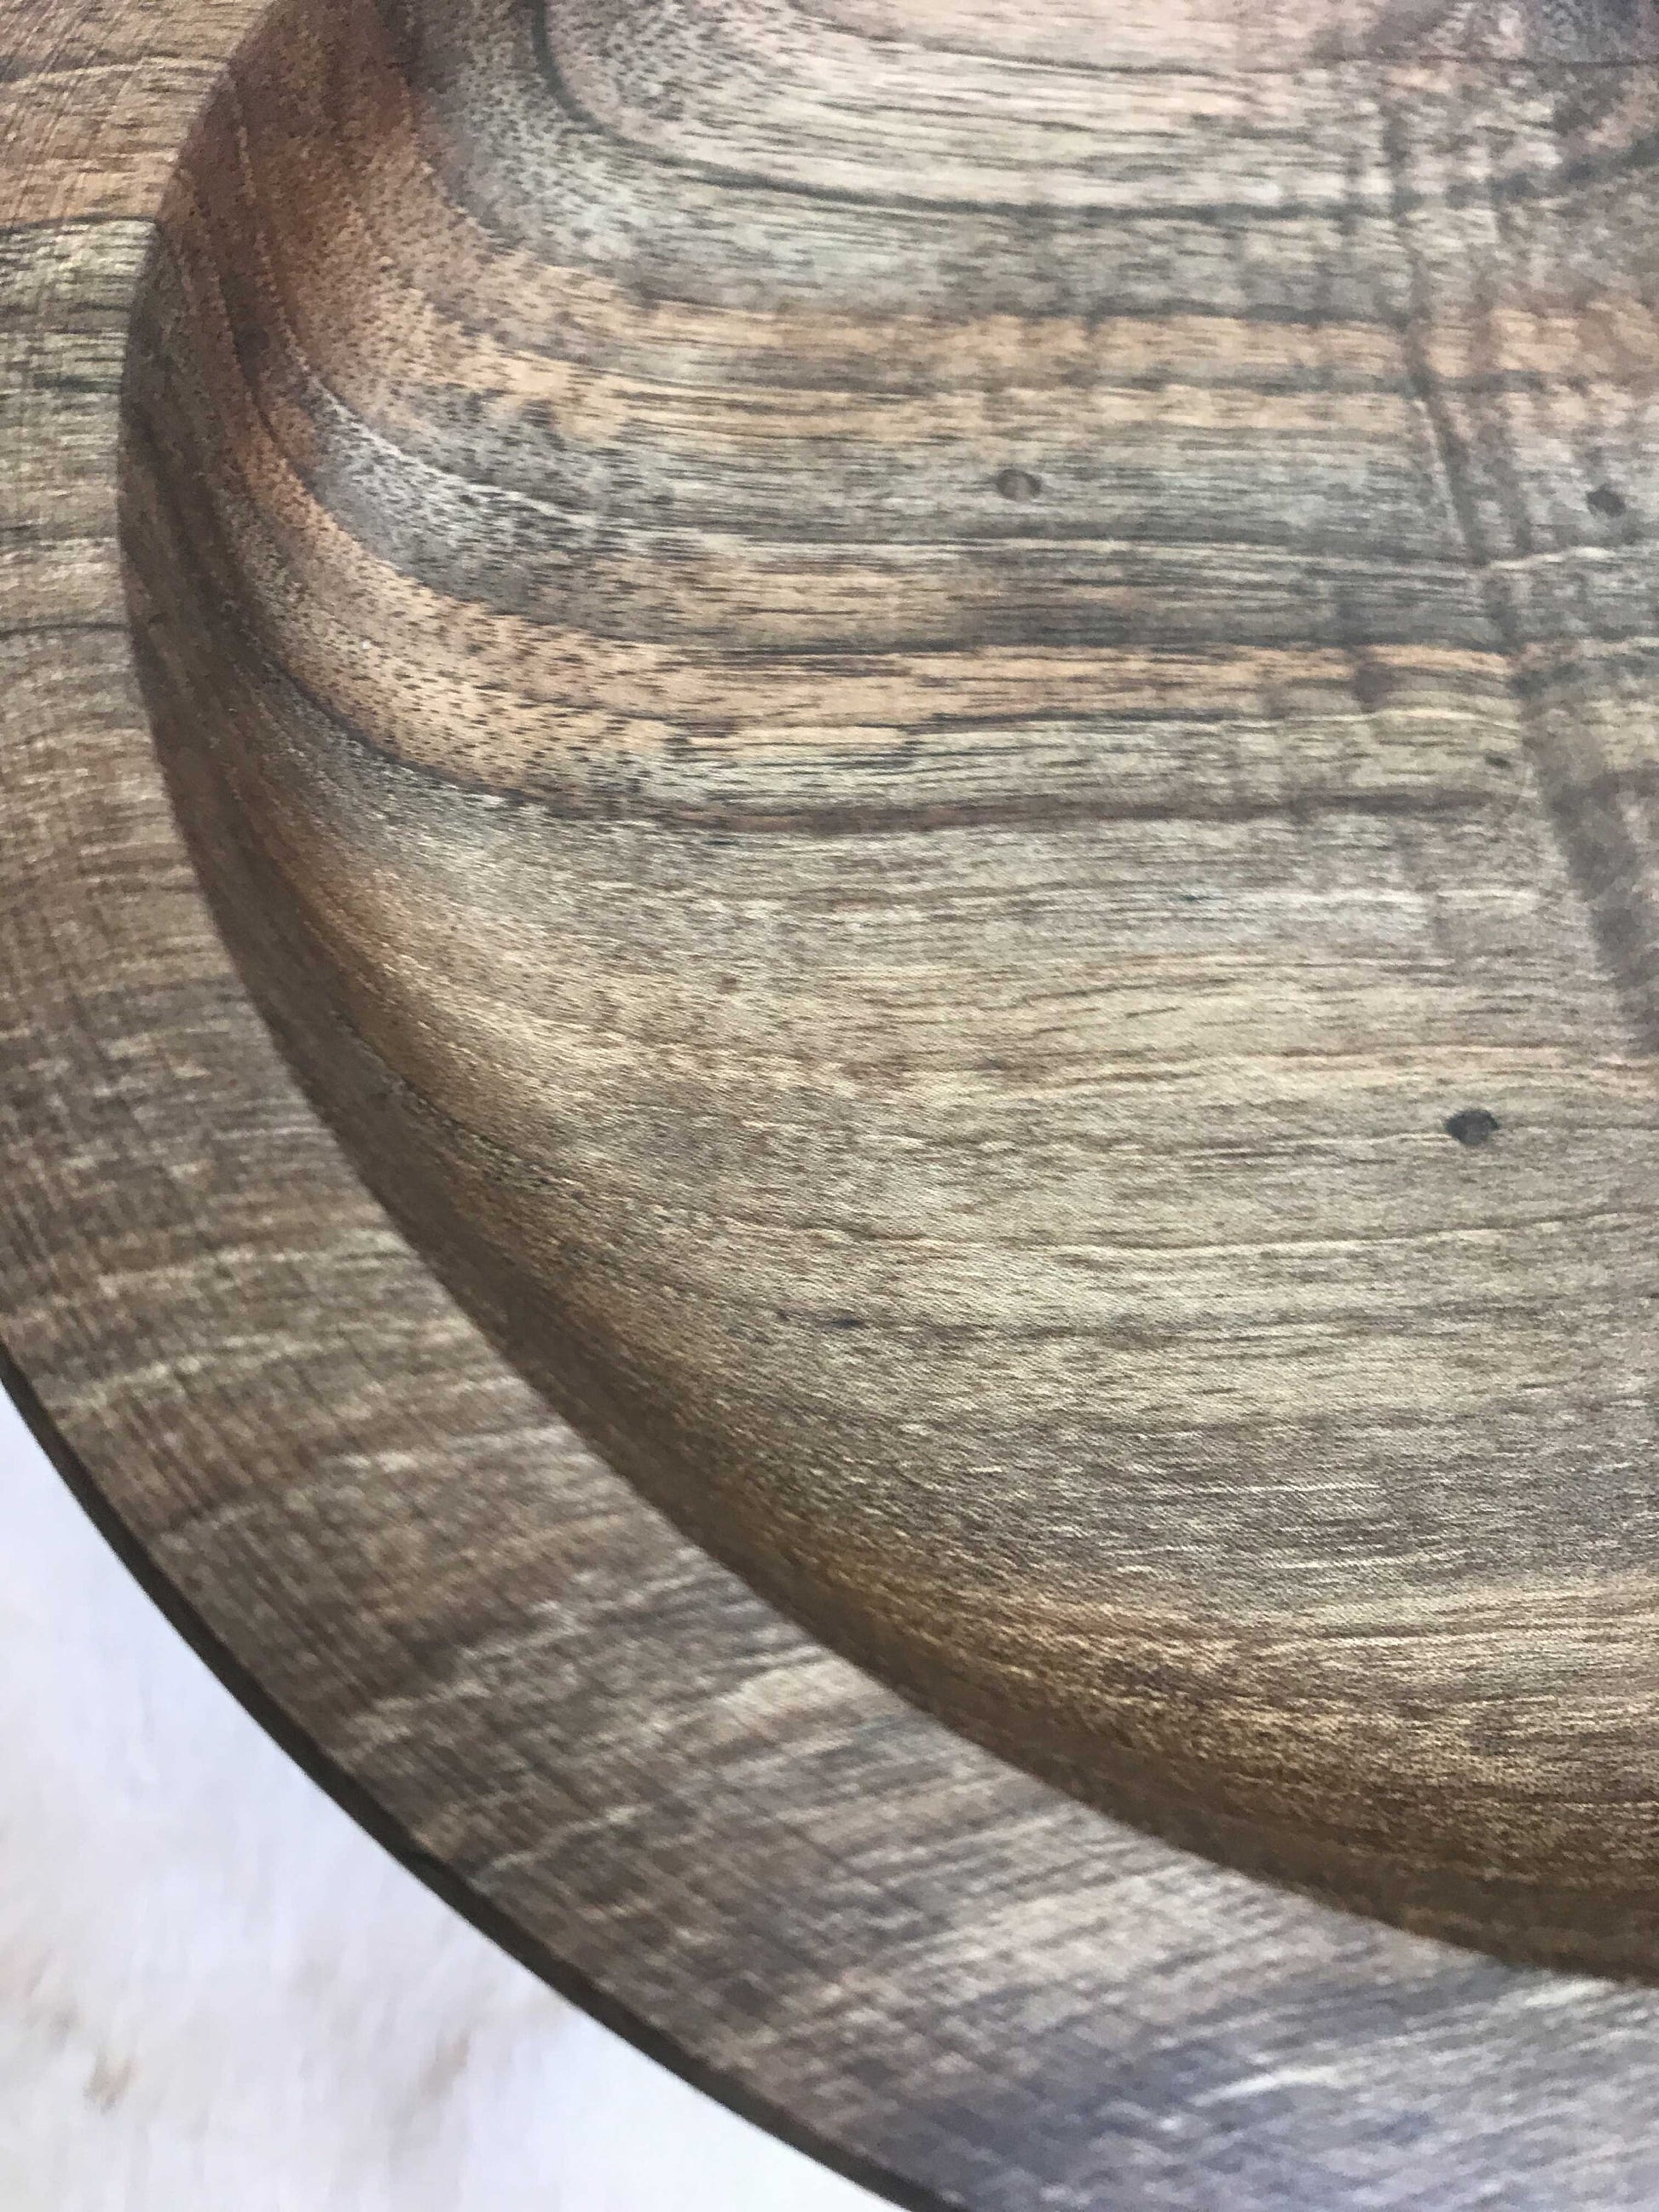 Walnut wood saucer,Serving walnut Tray dry fruit,Dinner Plate,wooden walnut design,perfect for dry fruits,green salad,popcorn,pastries,bread